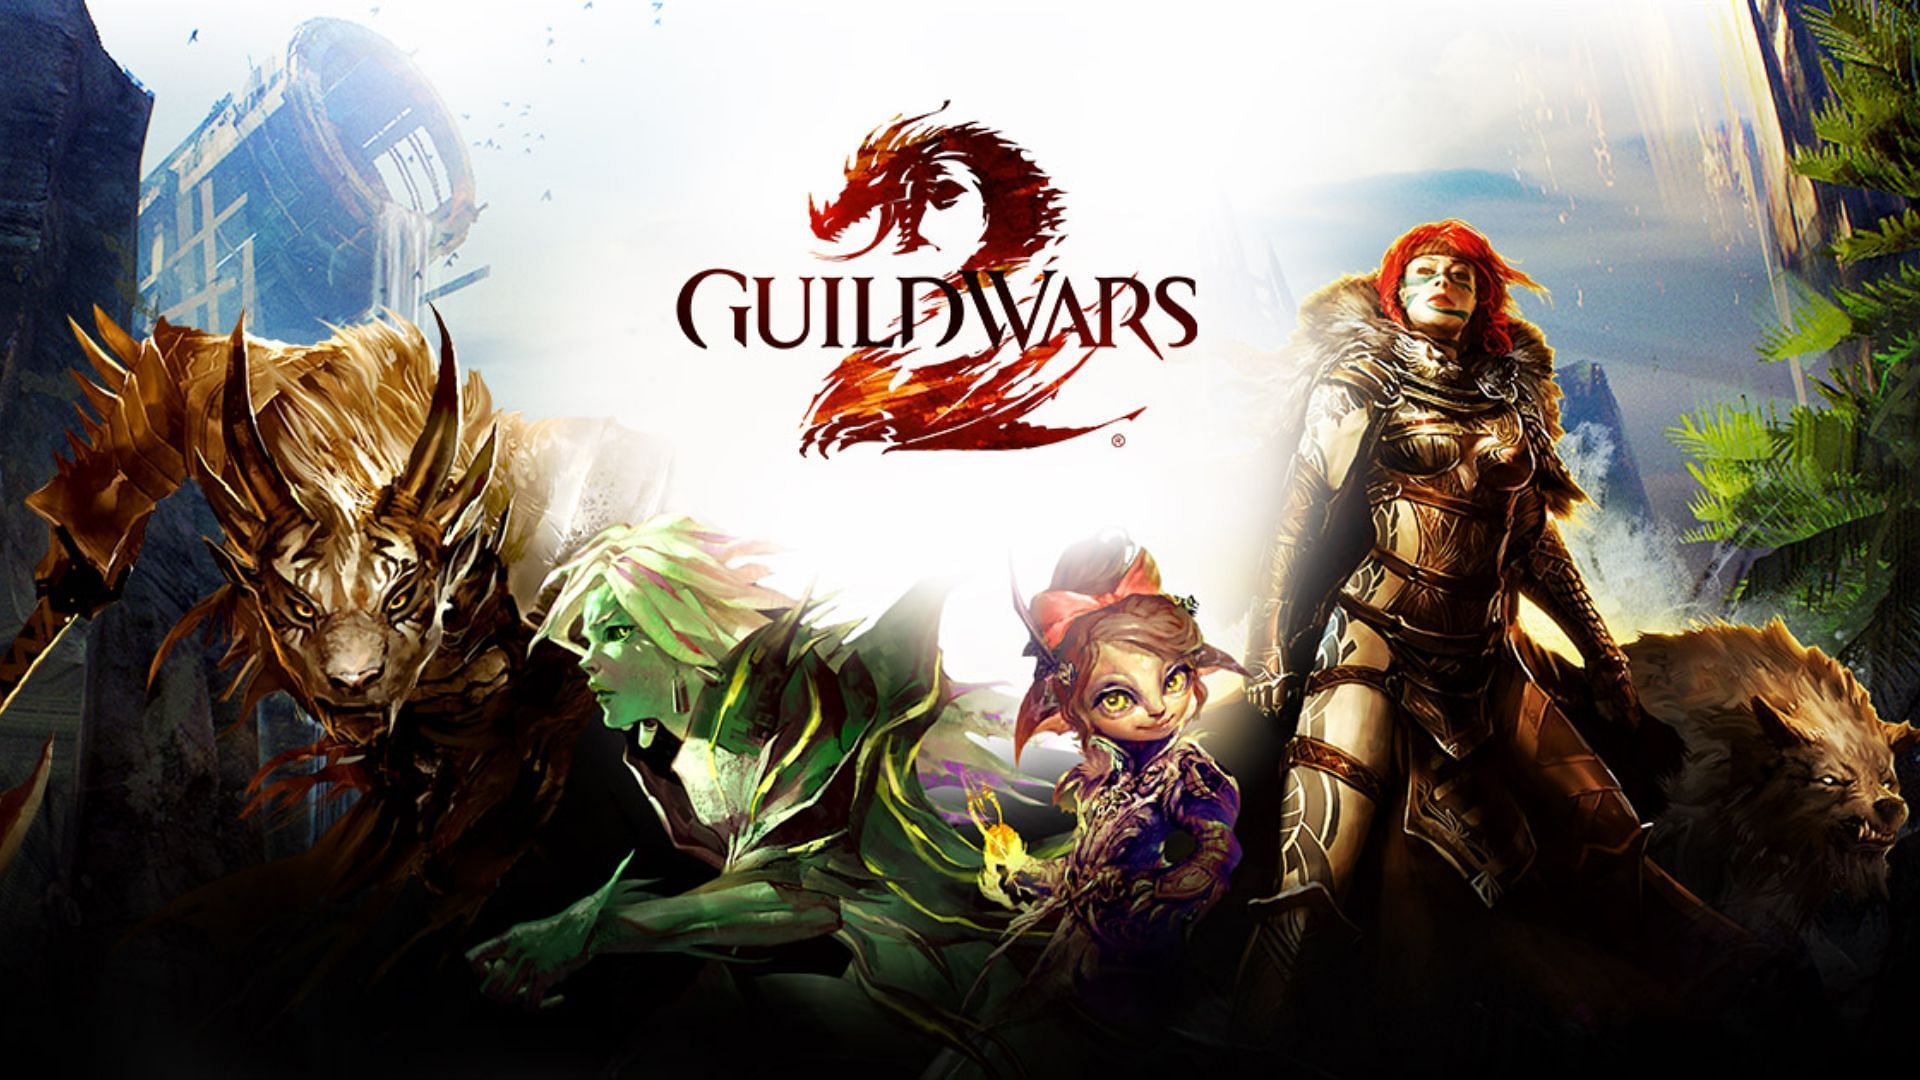 Guild Wars 2 is a free-to-play massively multiplayer online role playing game (Image via ArenaNet)